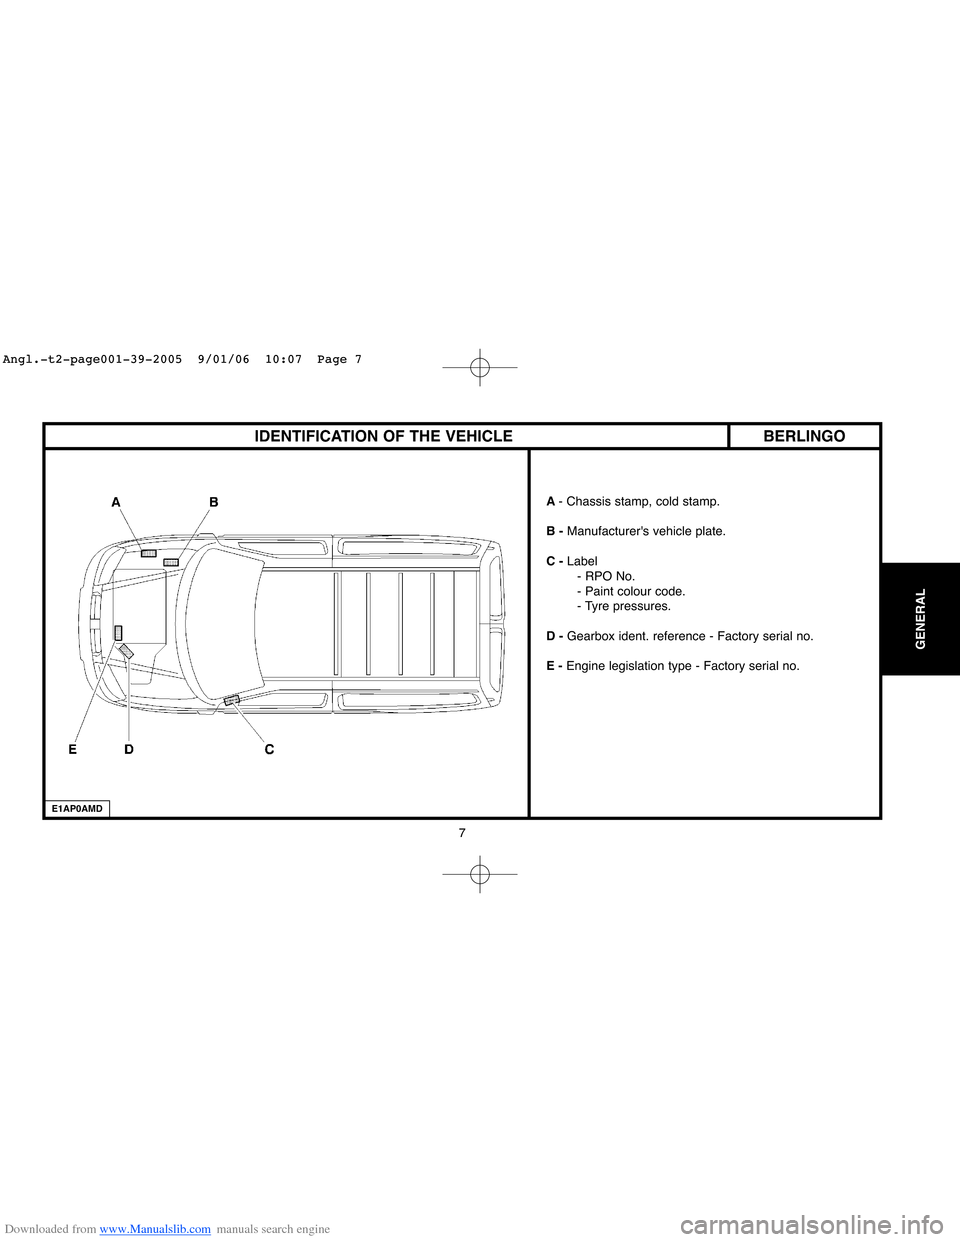 Citroen C4 2005 2.G Workshop Manual Downloaded from www.Manualslib.com manuals search engine 7
GENERAL
BERLINGO IDENTIFICATION OF THE VEHICLE
E1AP0AMD
A- Chassis stamp, cold stamp.
B - Manufacturers vehicle plate.
C -Label
- RPO No.
- 